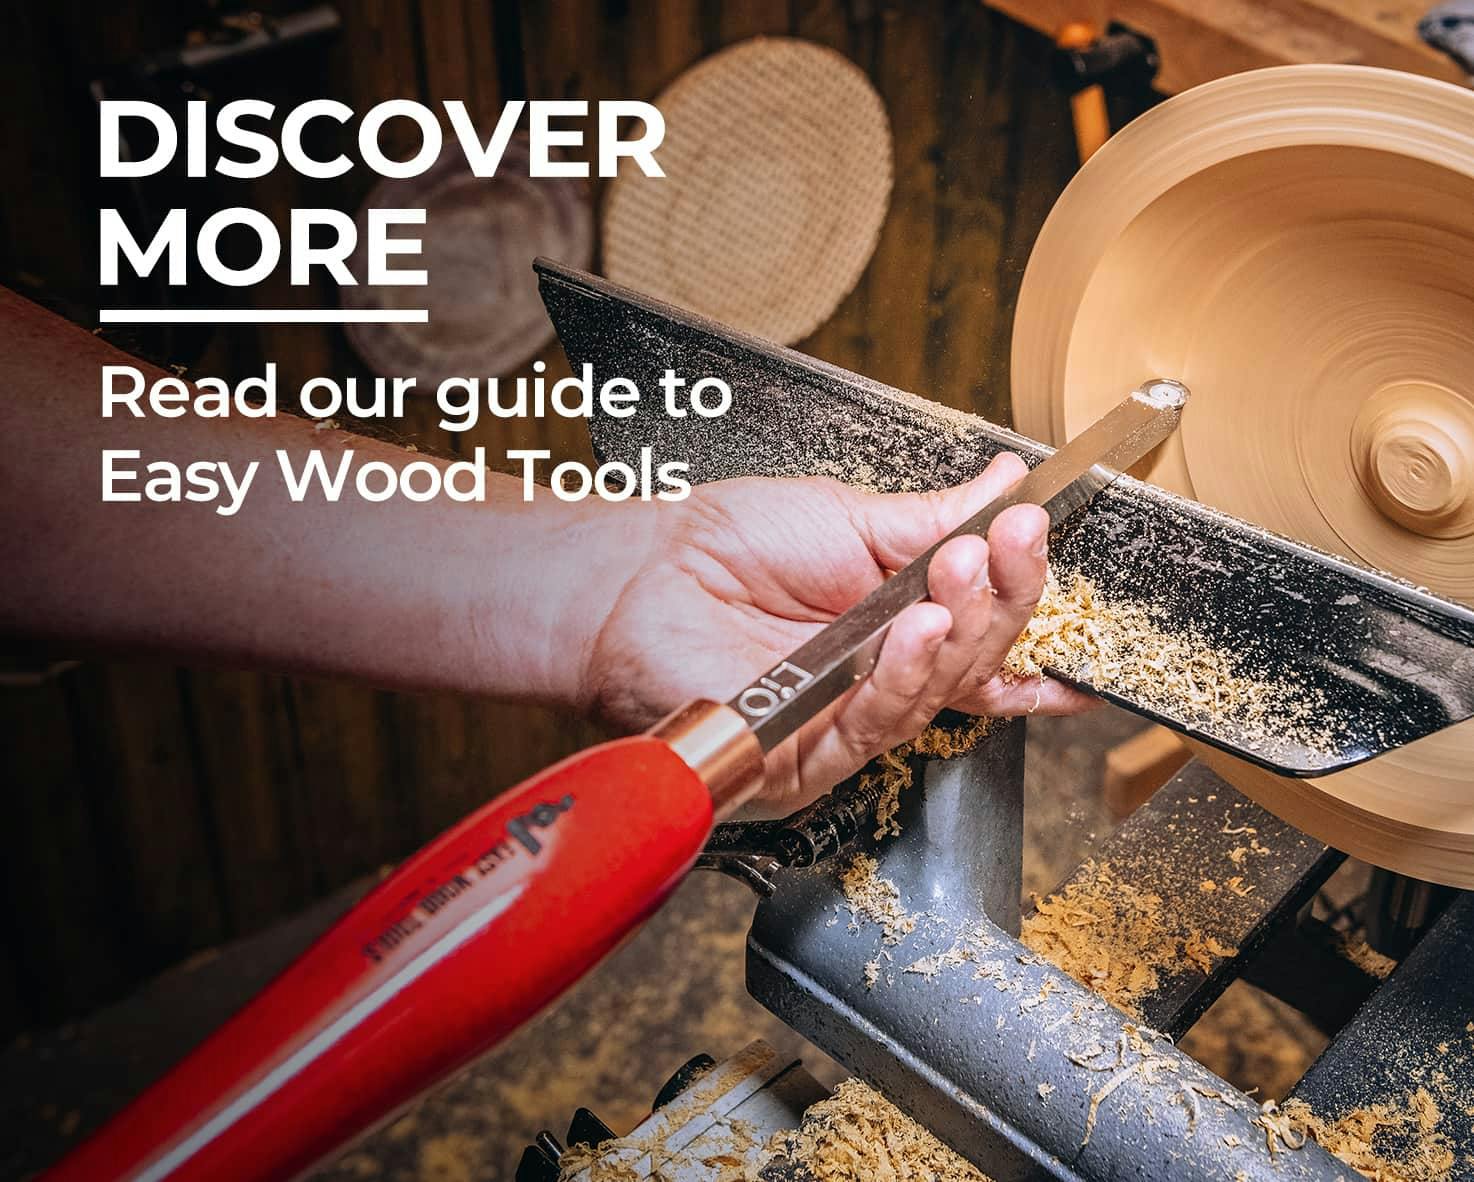 Read our guide to Easy Wood Tools